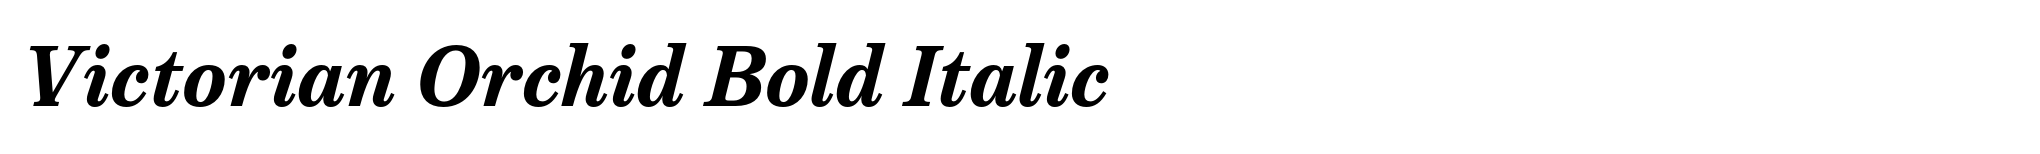 Victorian Orchid Bold Italic image